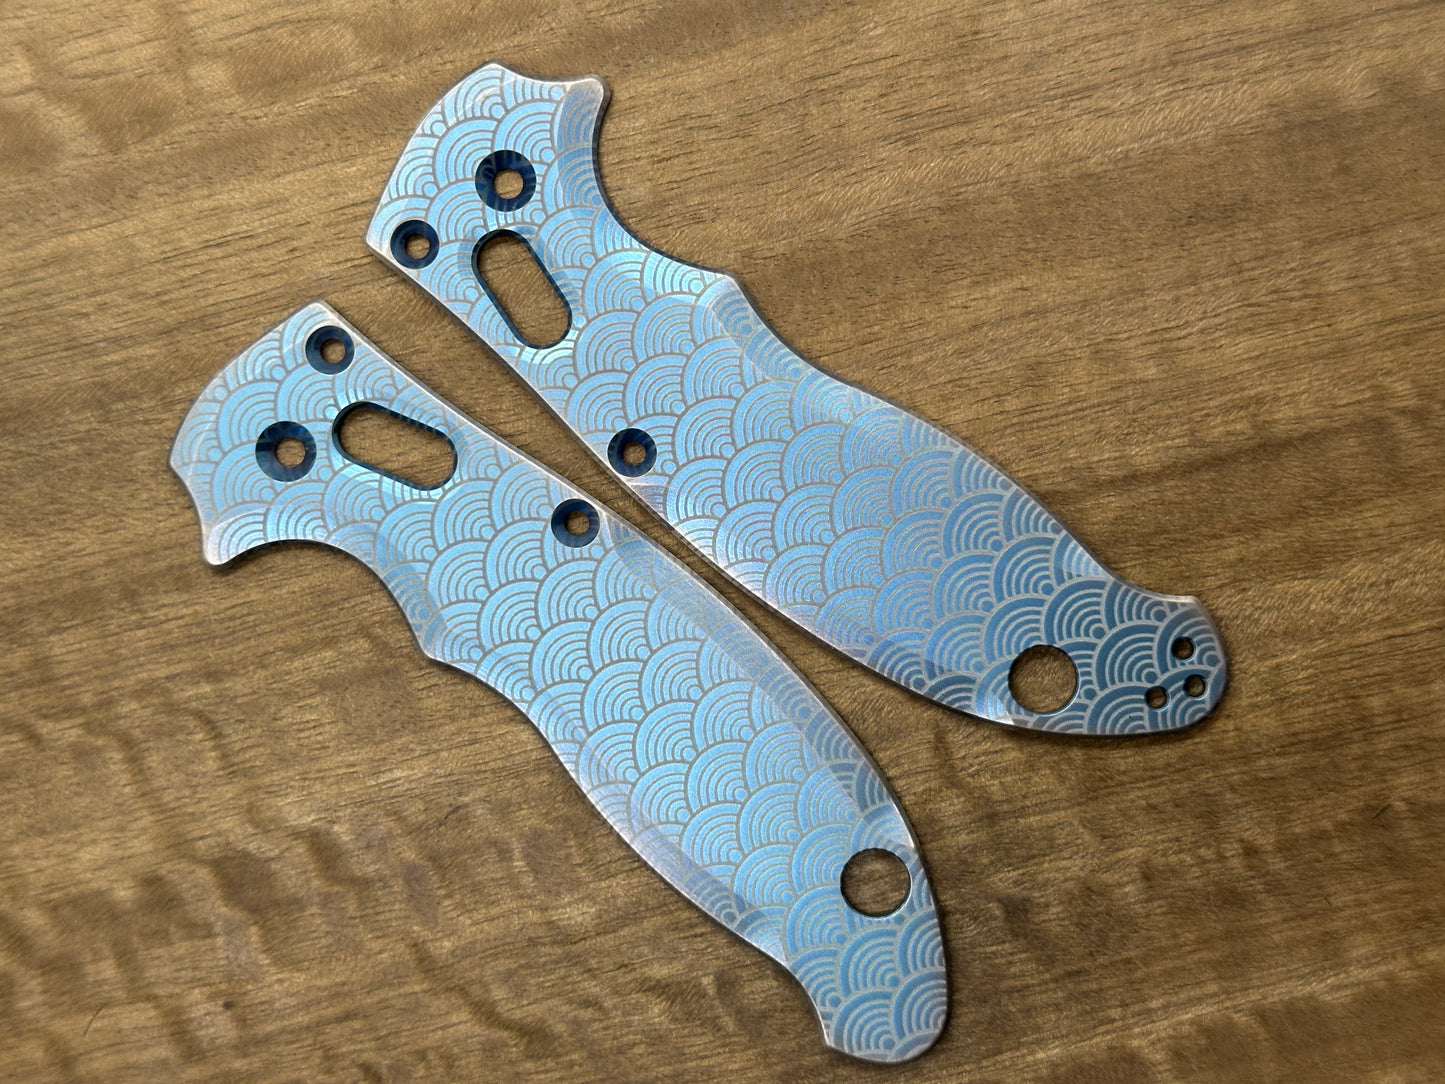 Blue ano Brushed SEIGAIHA Titanium scales for Spyderco MANIX 2